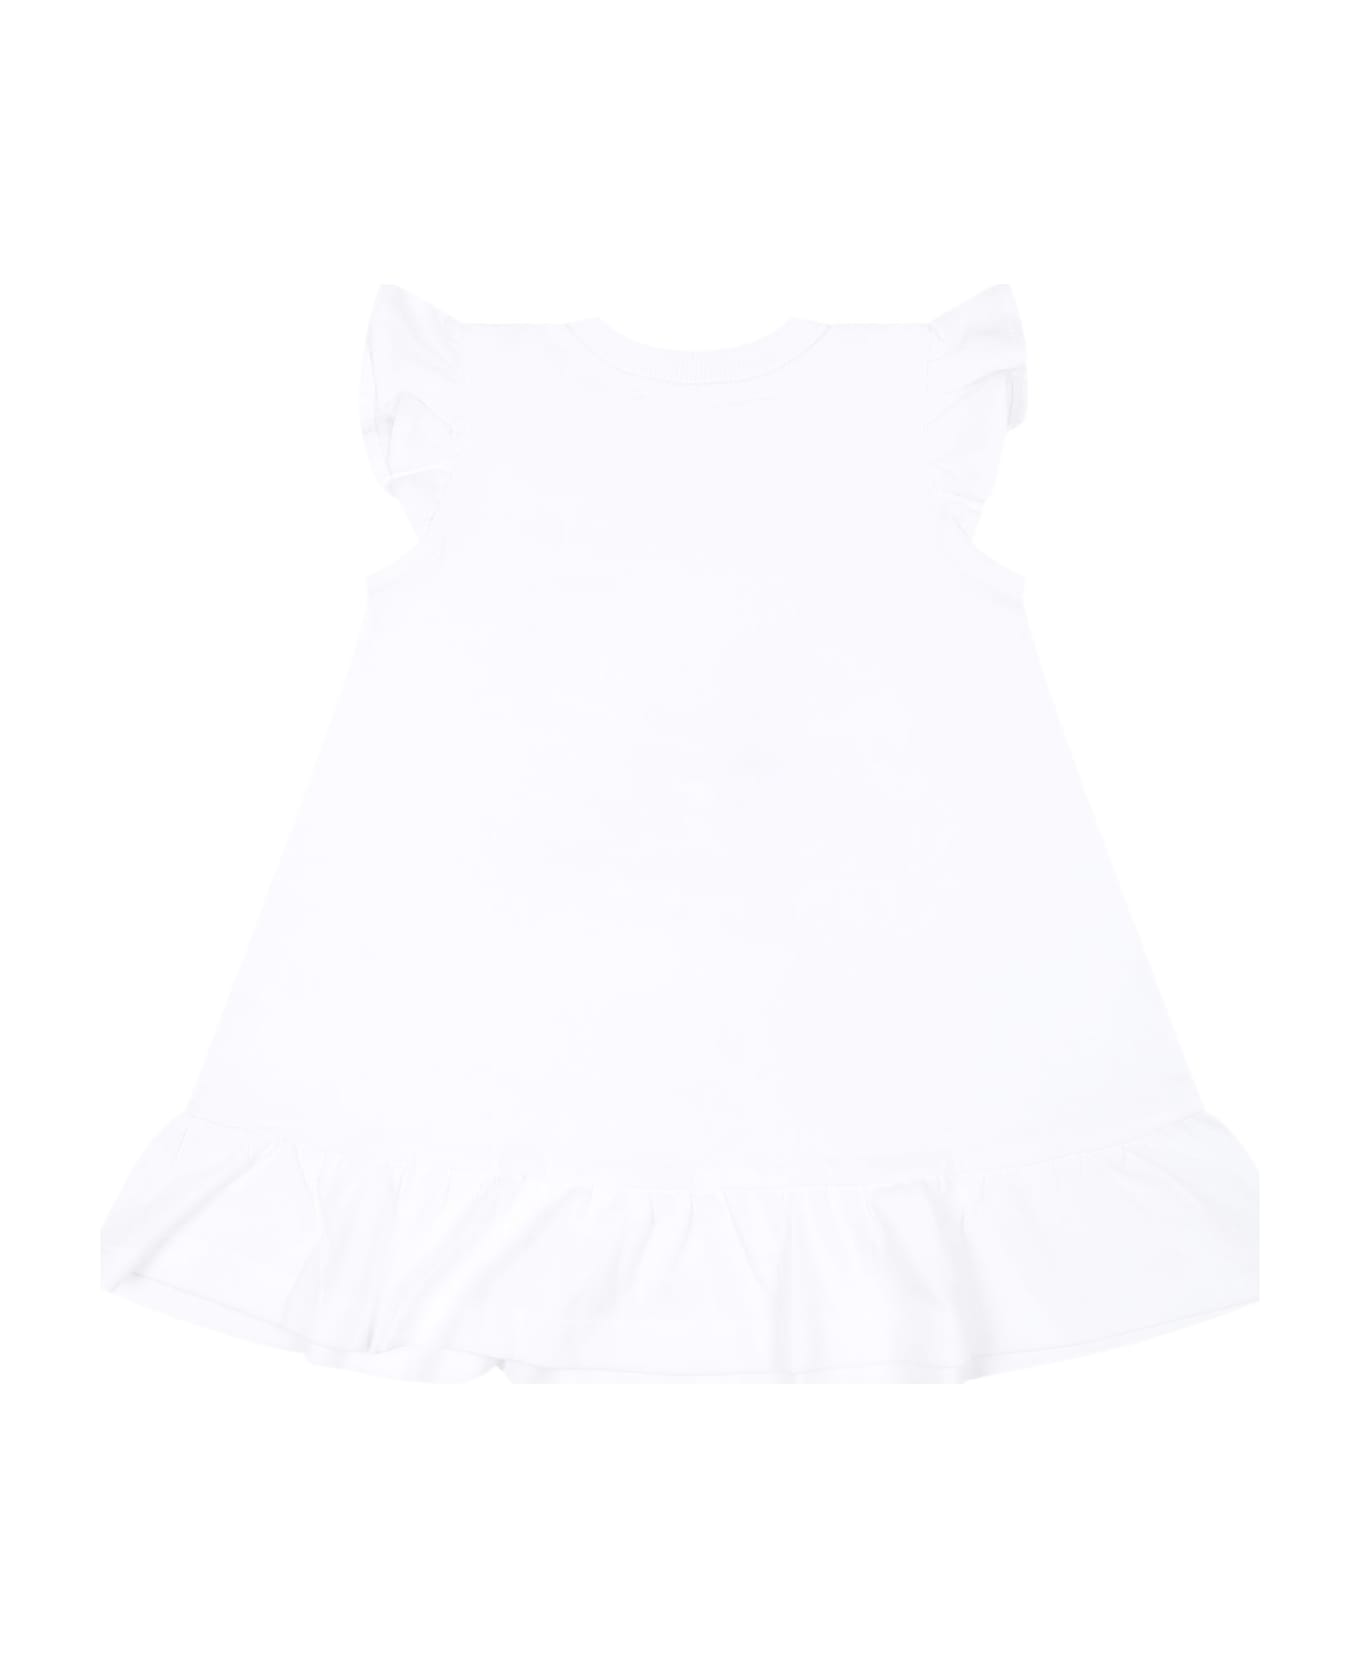 Moschino White Dress For Baby Girl With Black Print - White ウェア